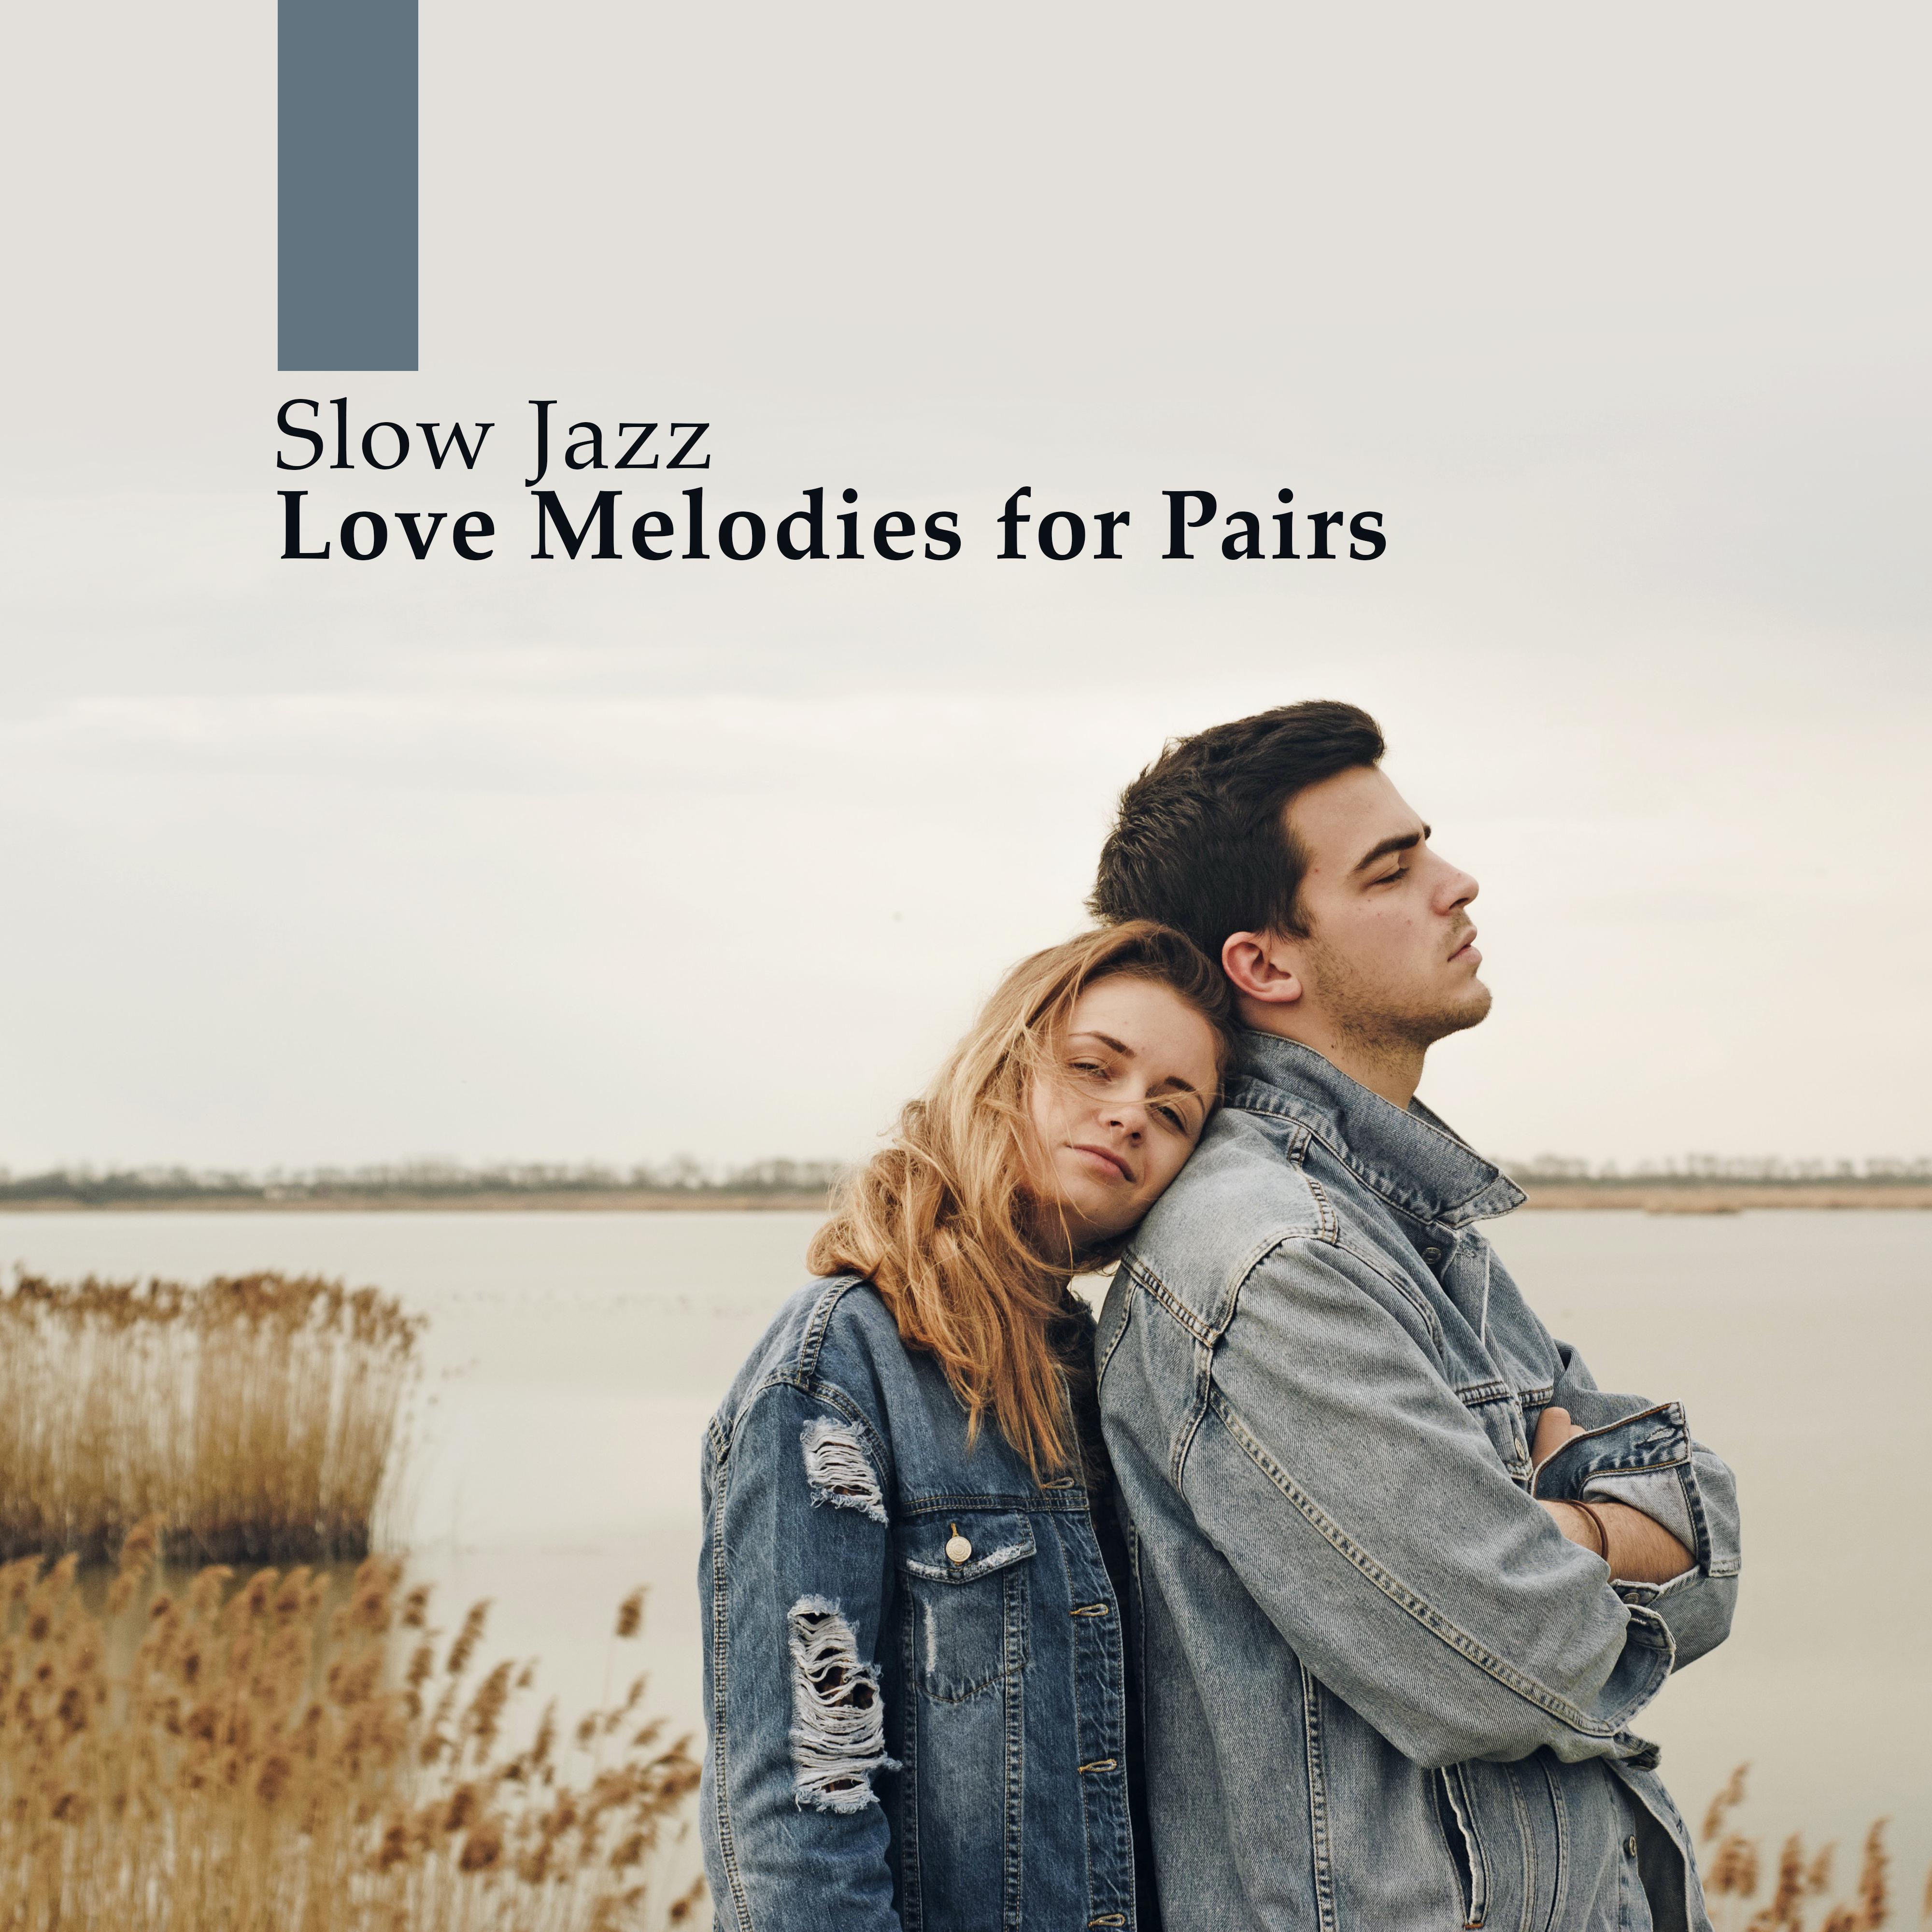 Slow Jazz Love Melodies for Pairs